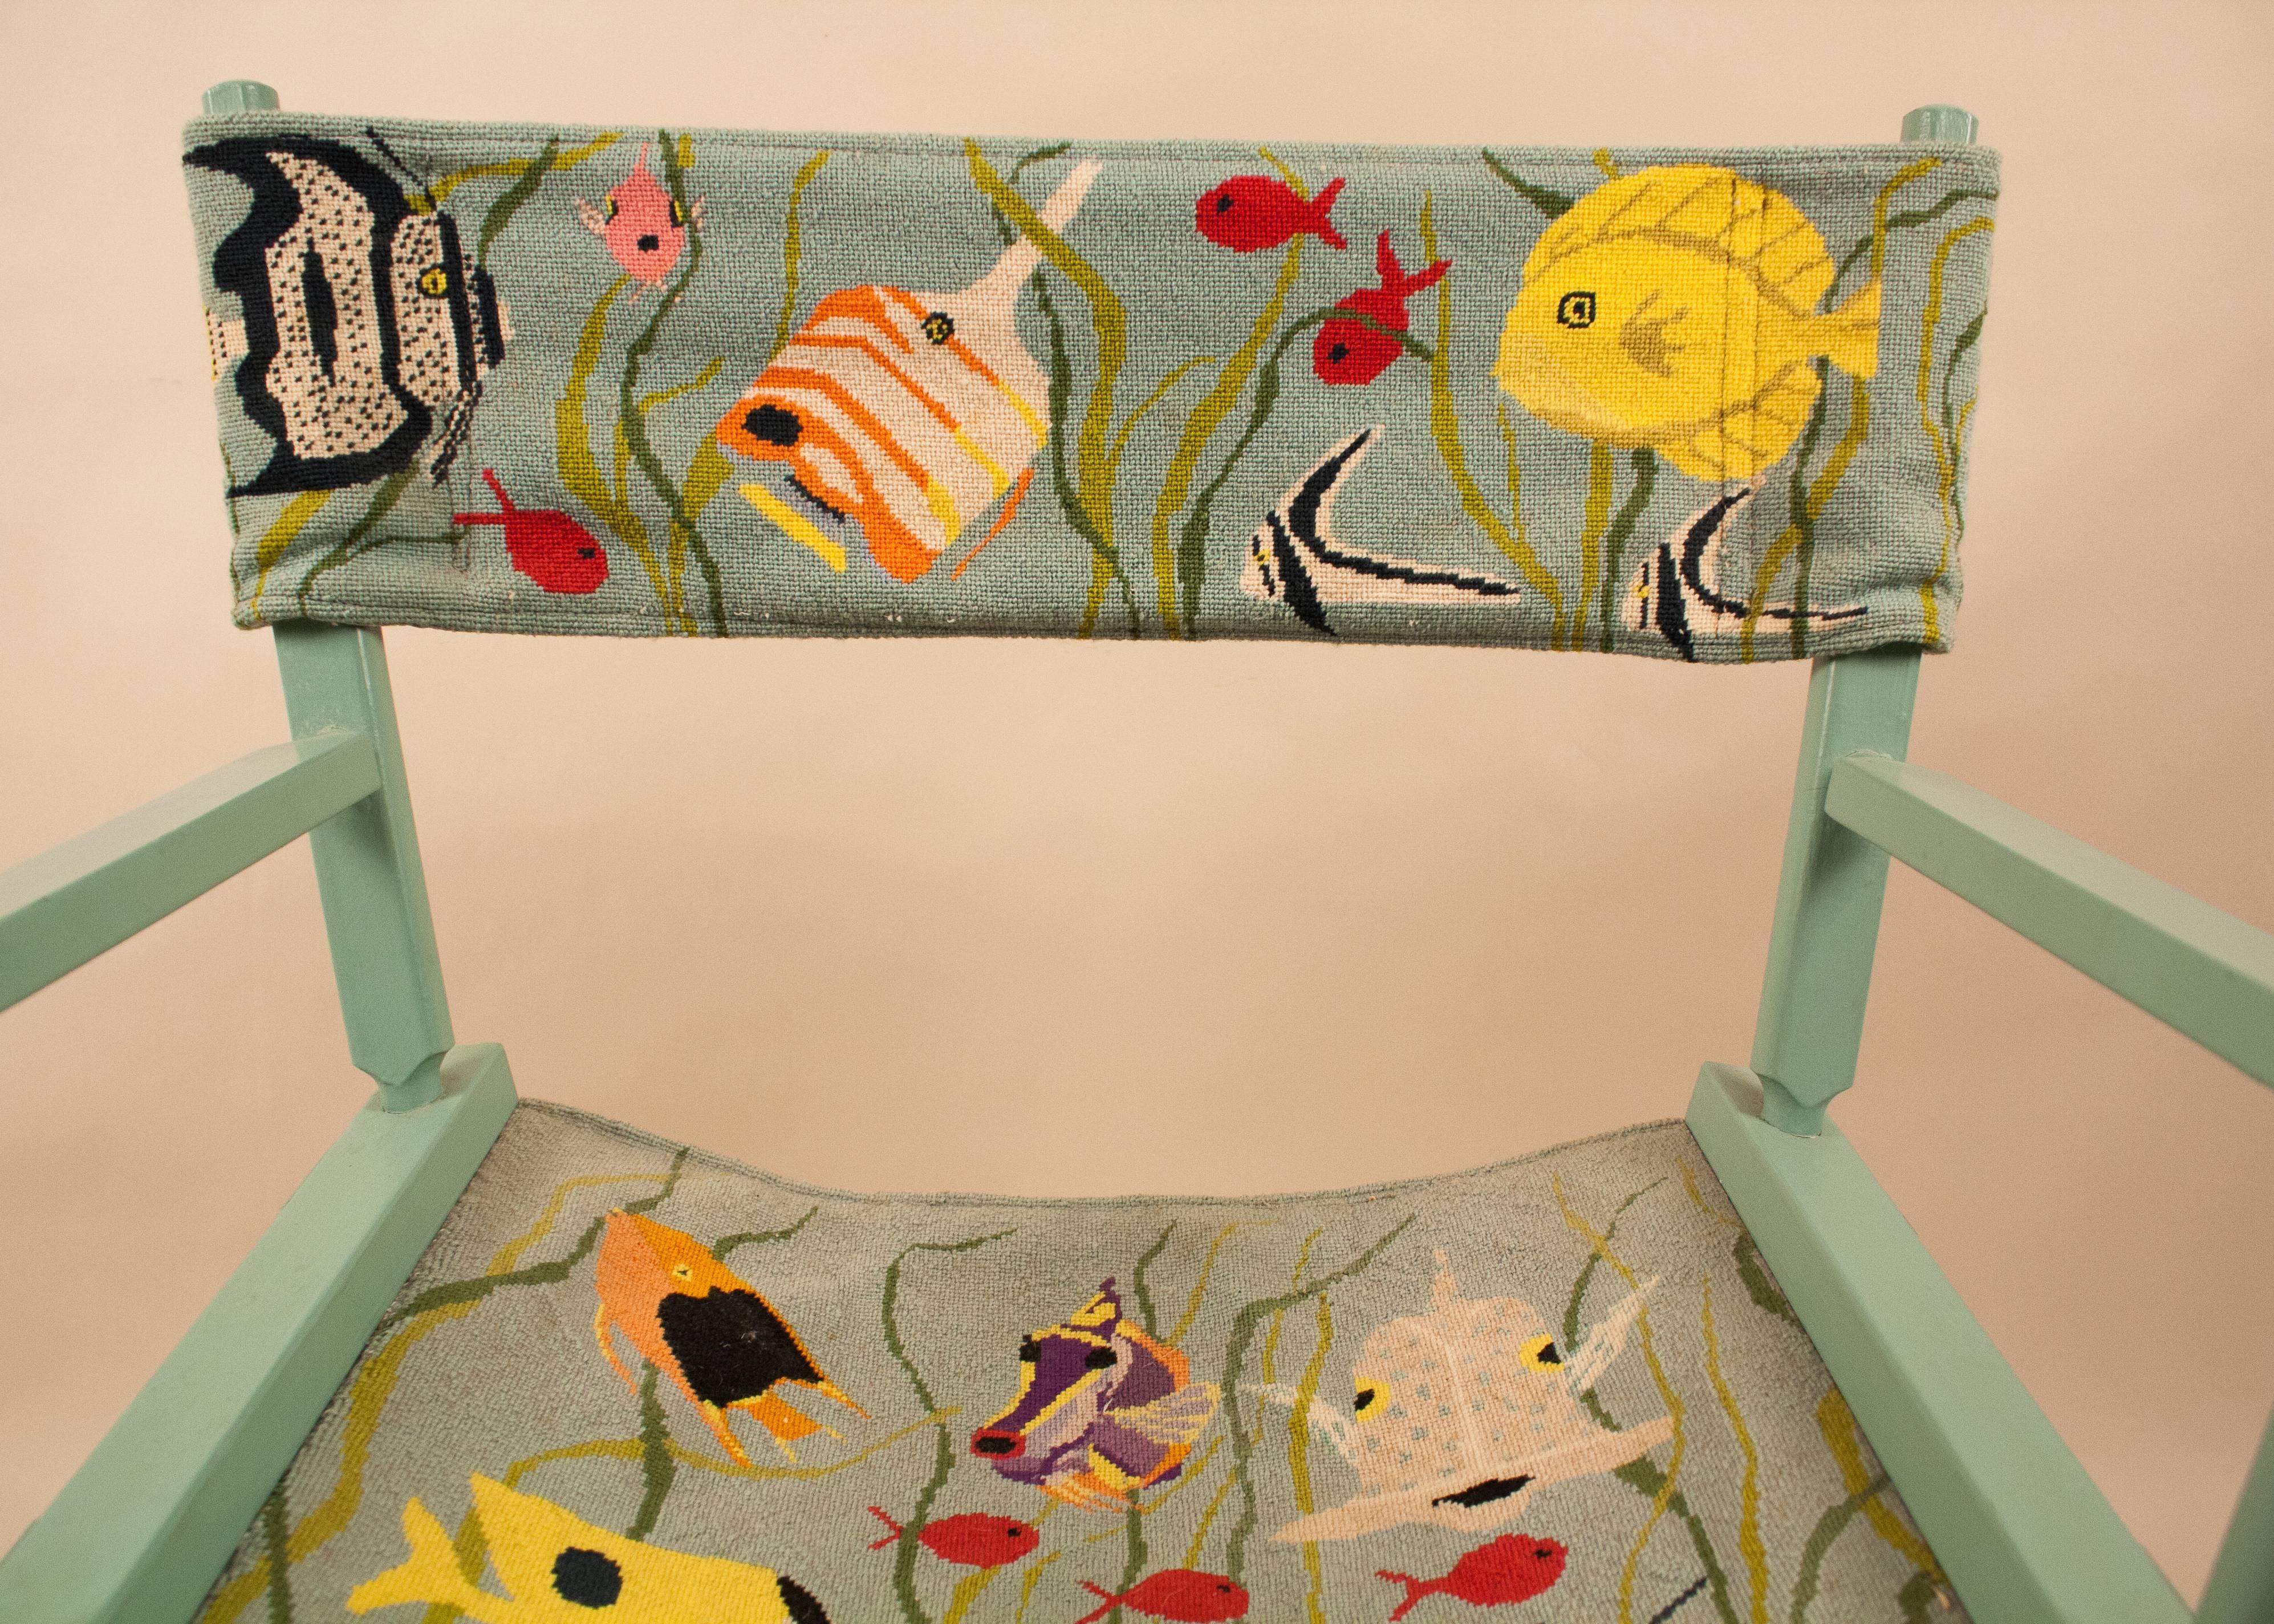 Hand-Crafted Director's Chair with Needlepoint Tropical Fish Fabric